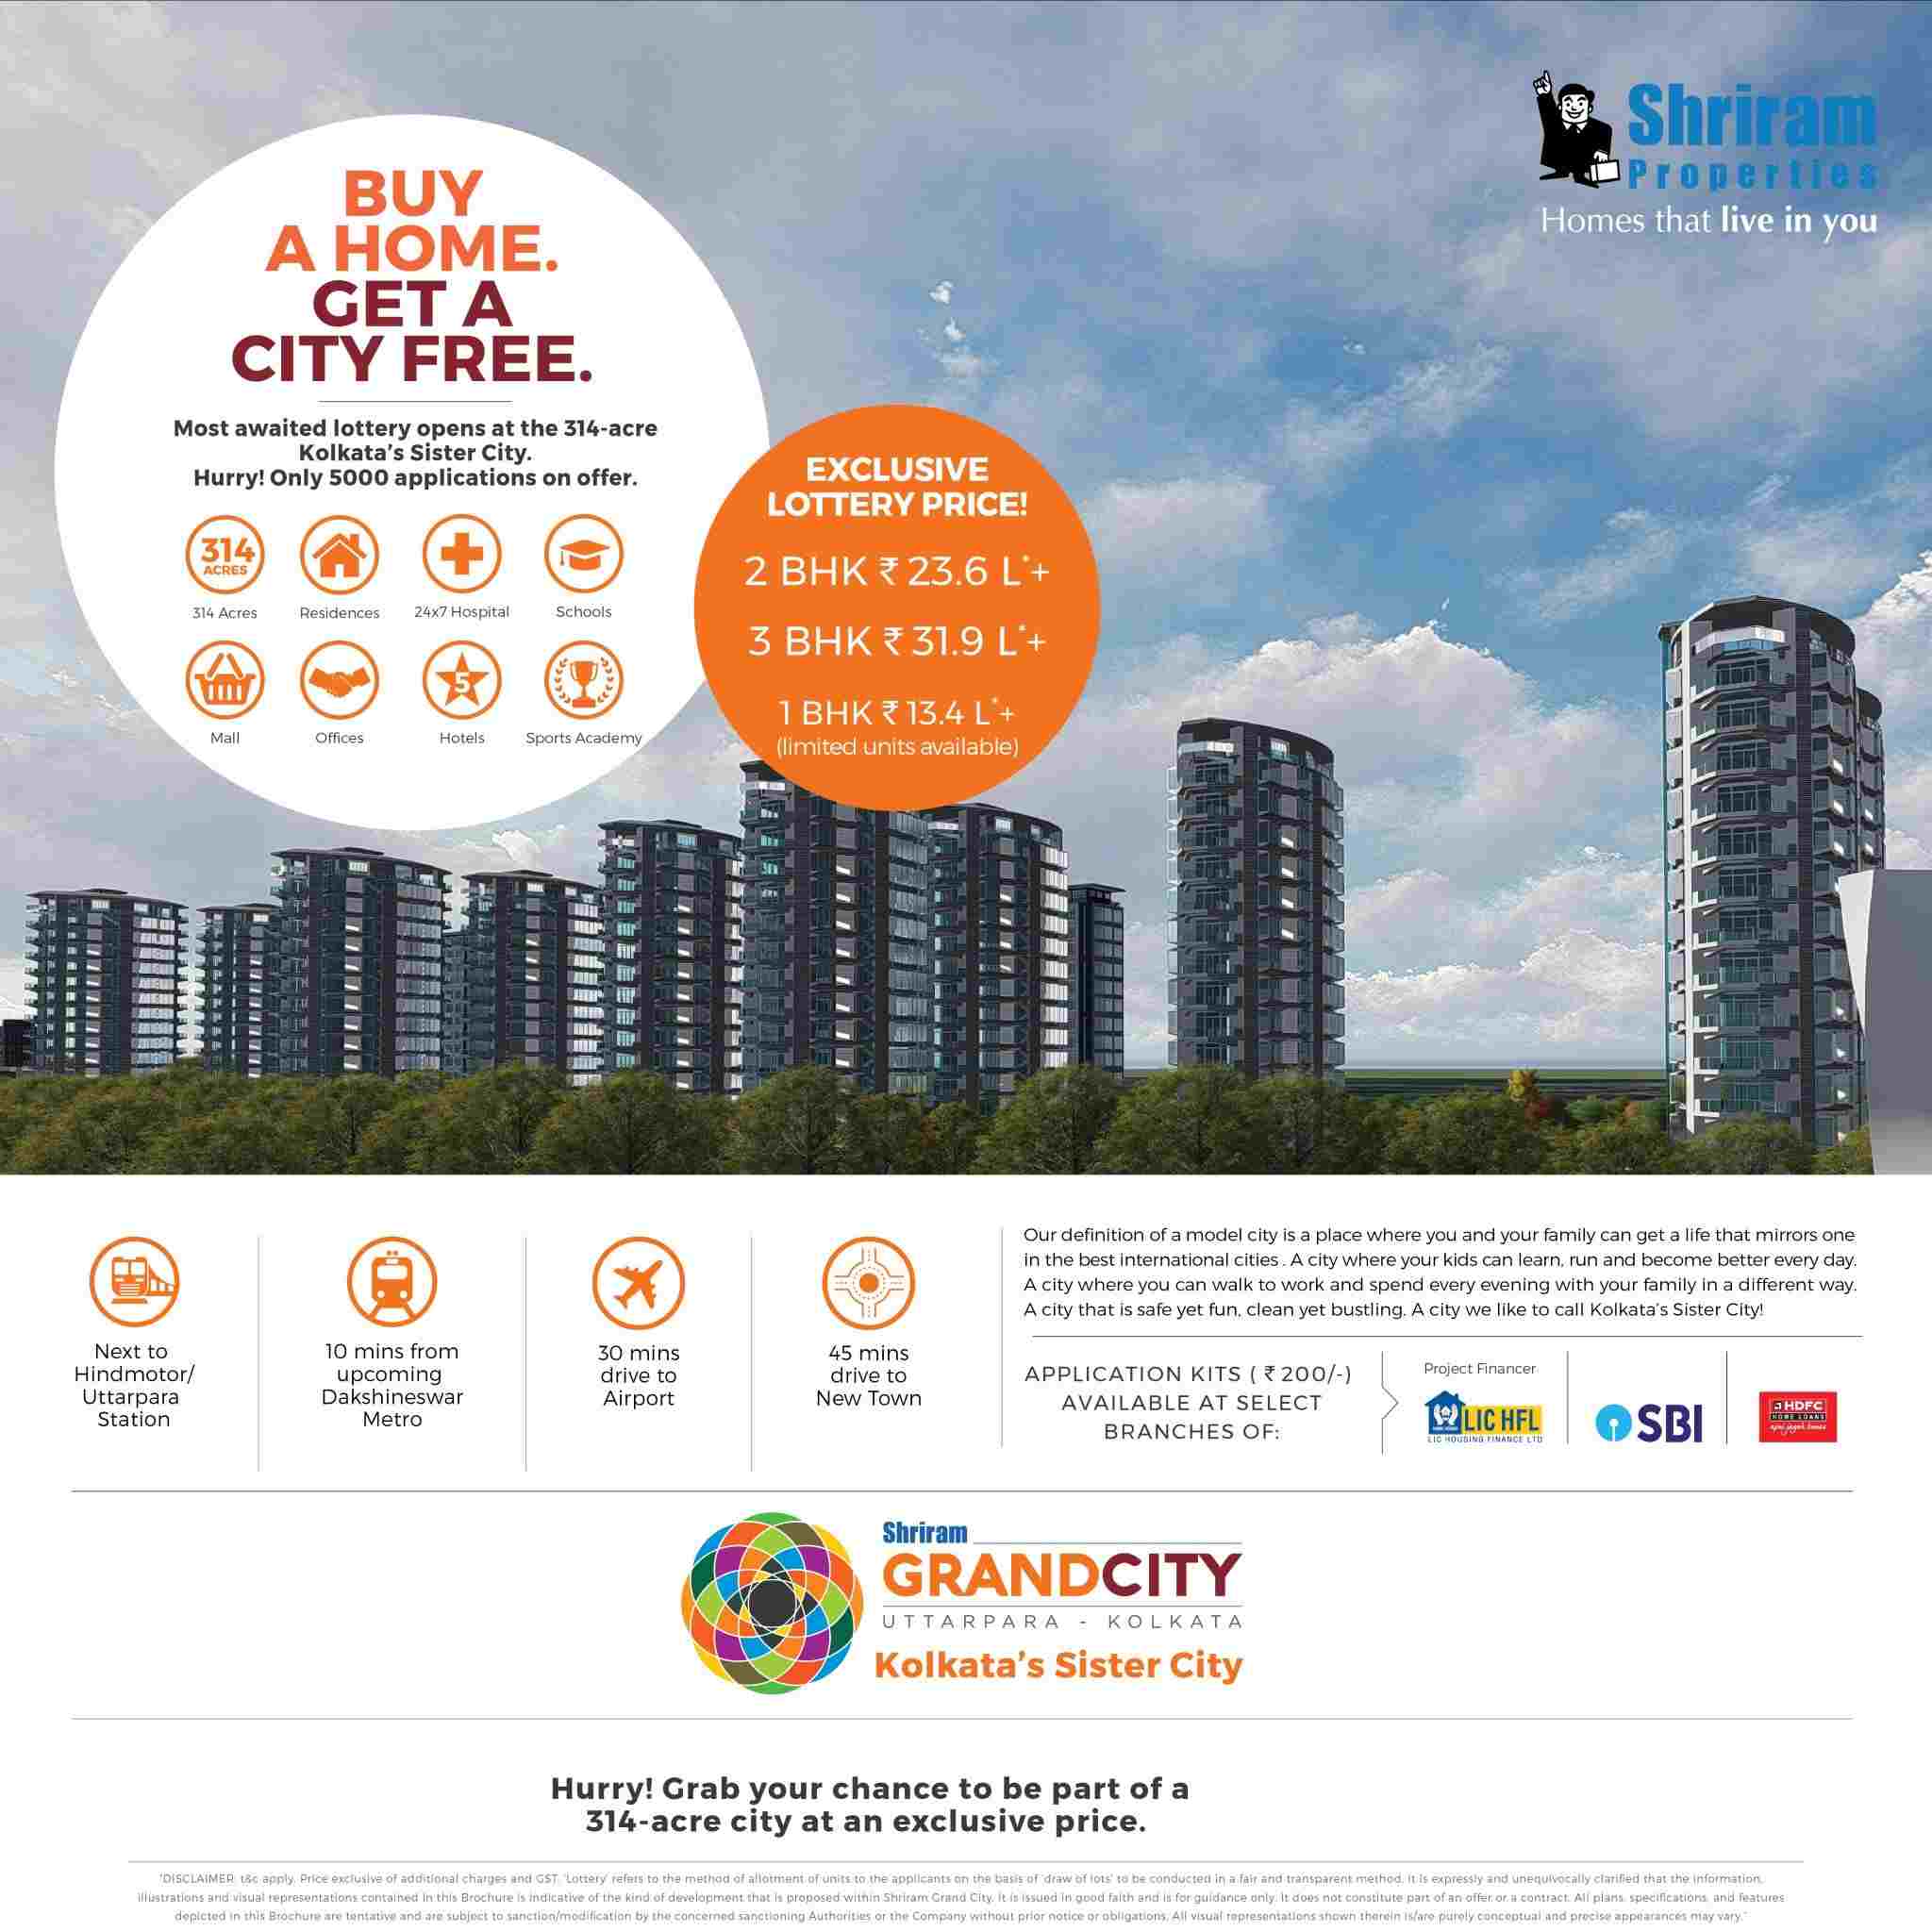 Grab your chance to be part of 314-acre city with exclusive price at Shriram Grand City in Kolkata Update